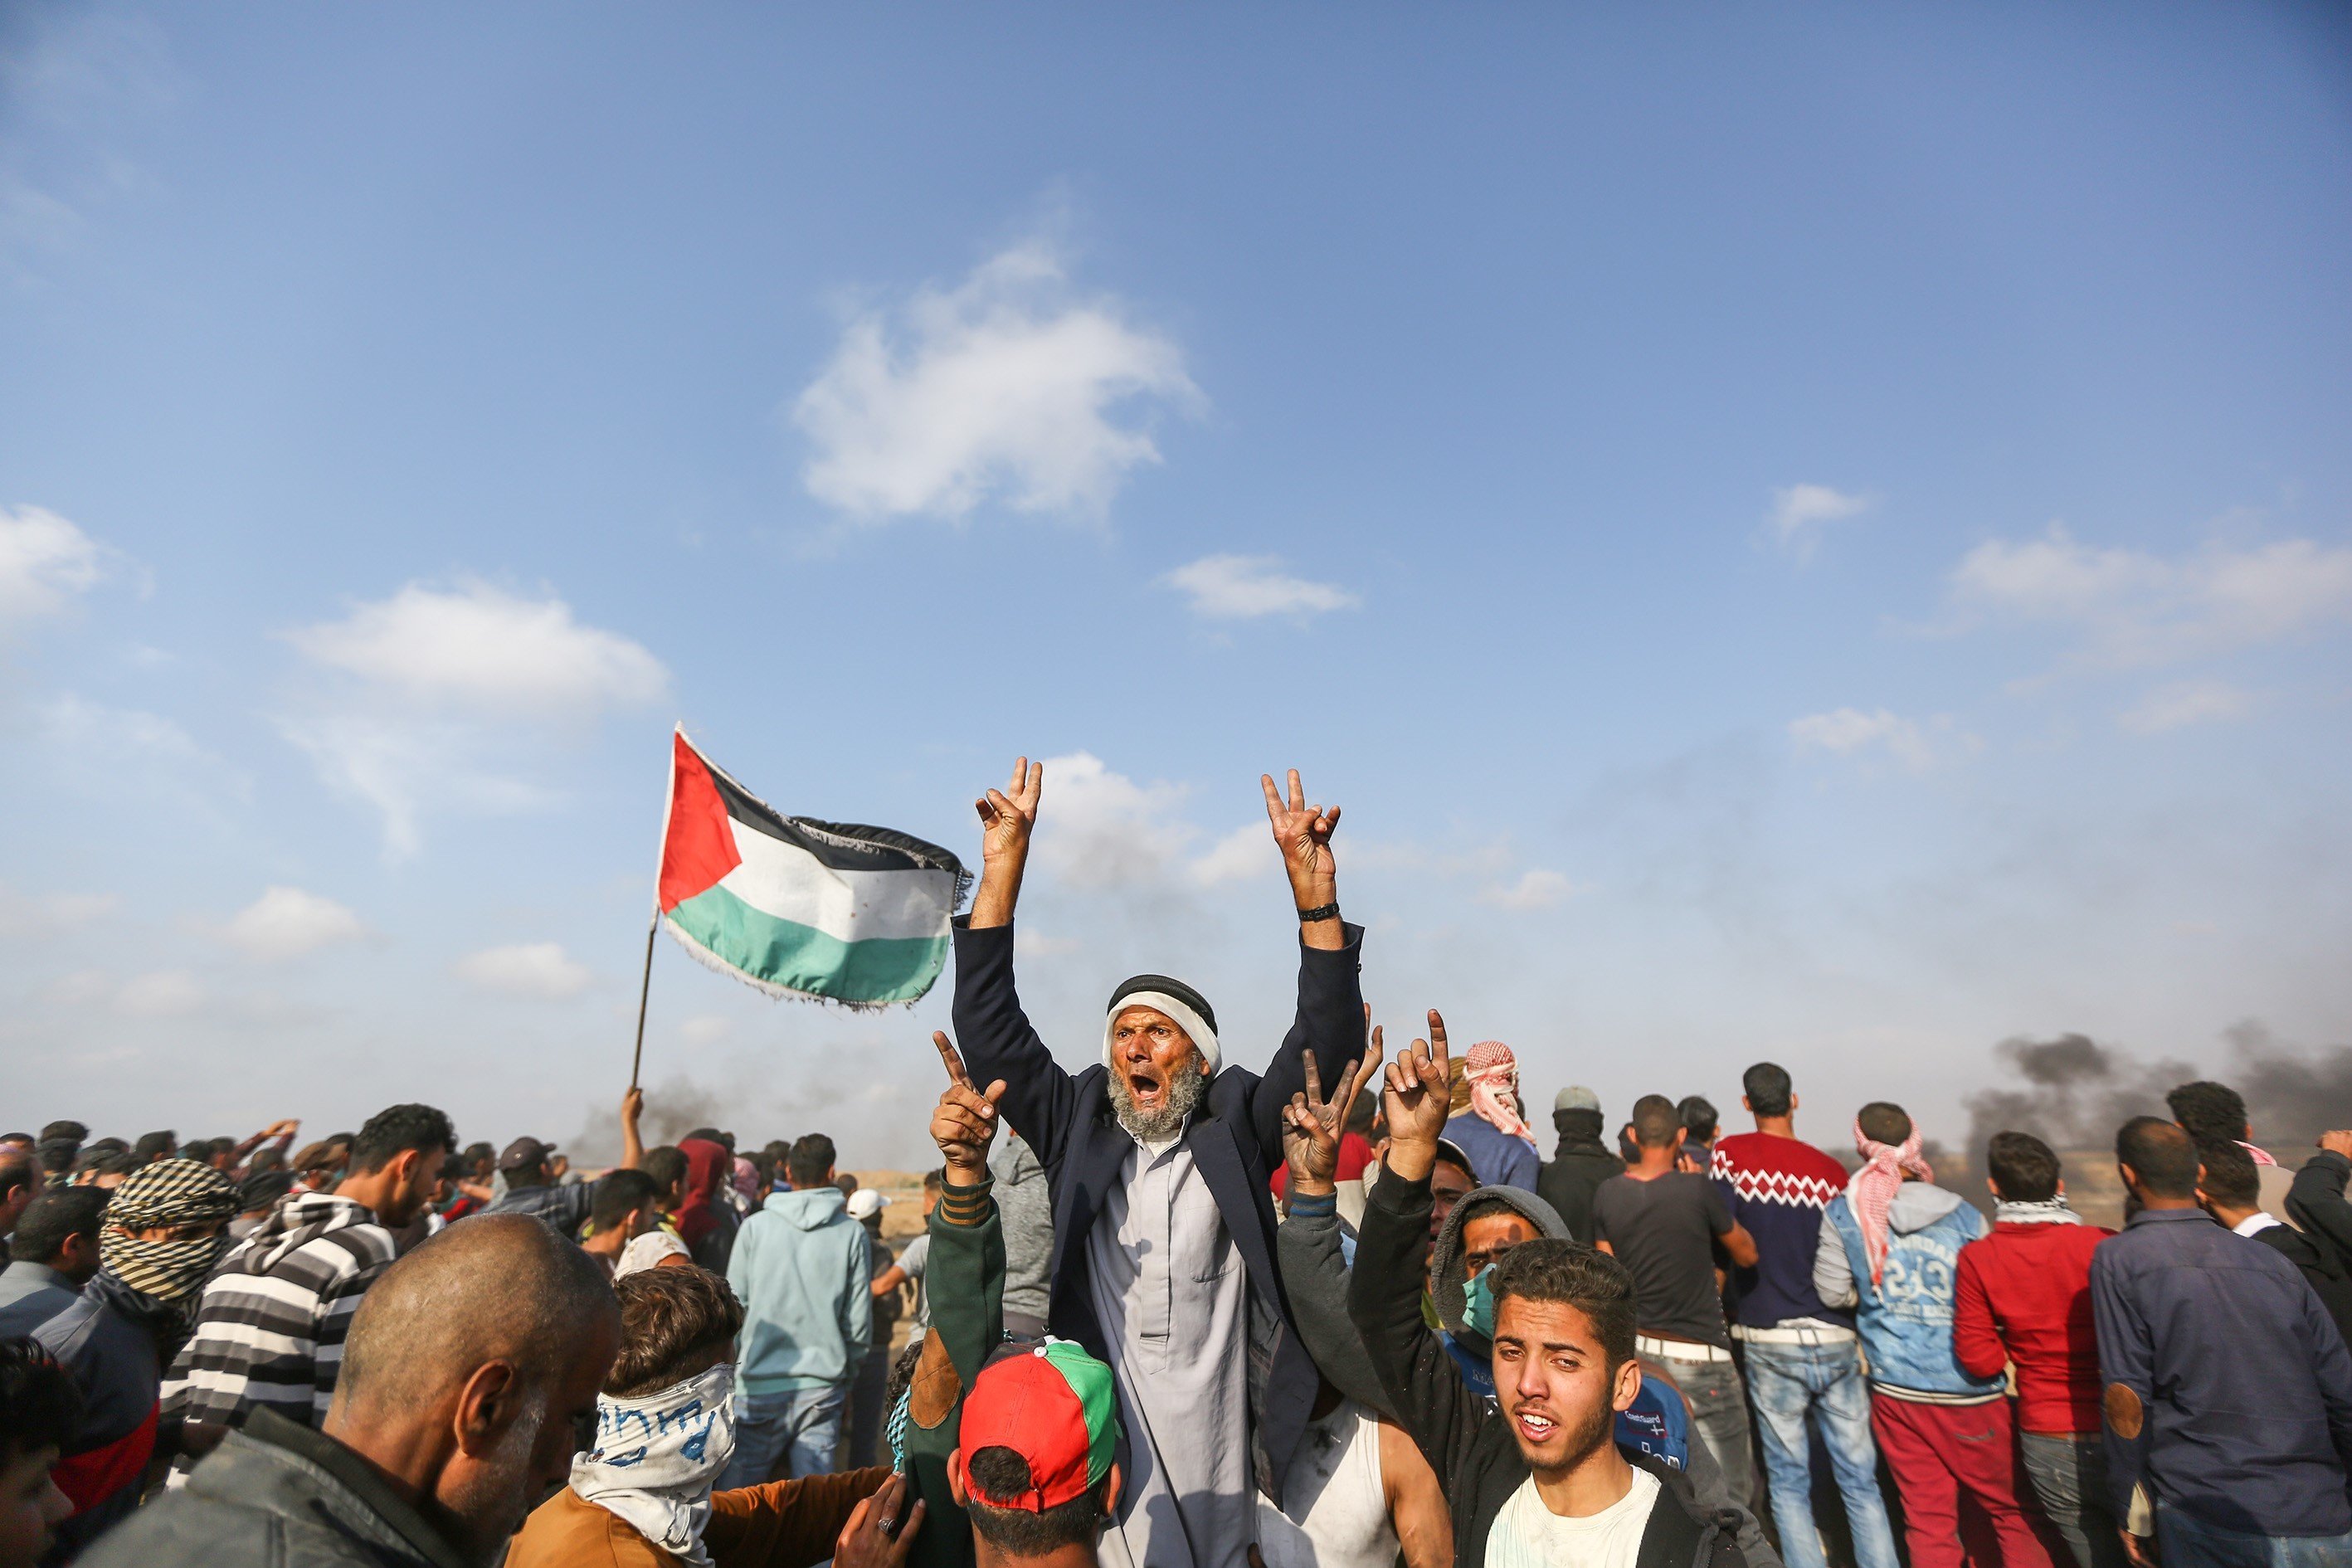 Palestinian Teen Dies After Being Shot By Israeli Forces In Gaza Protests